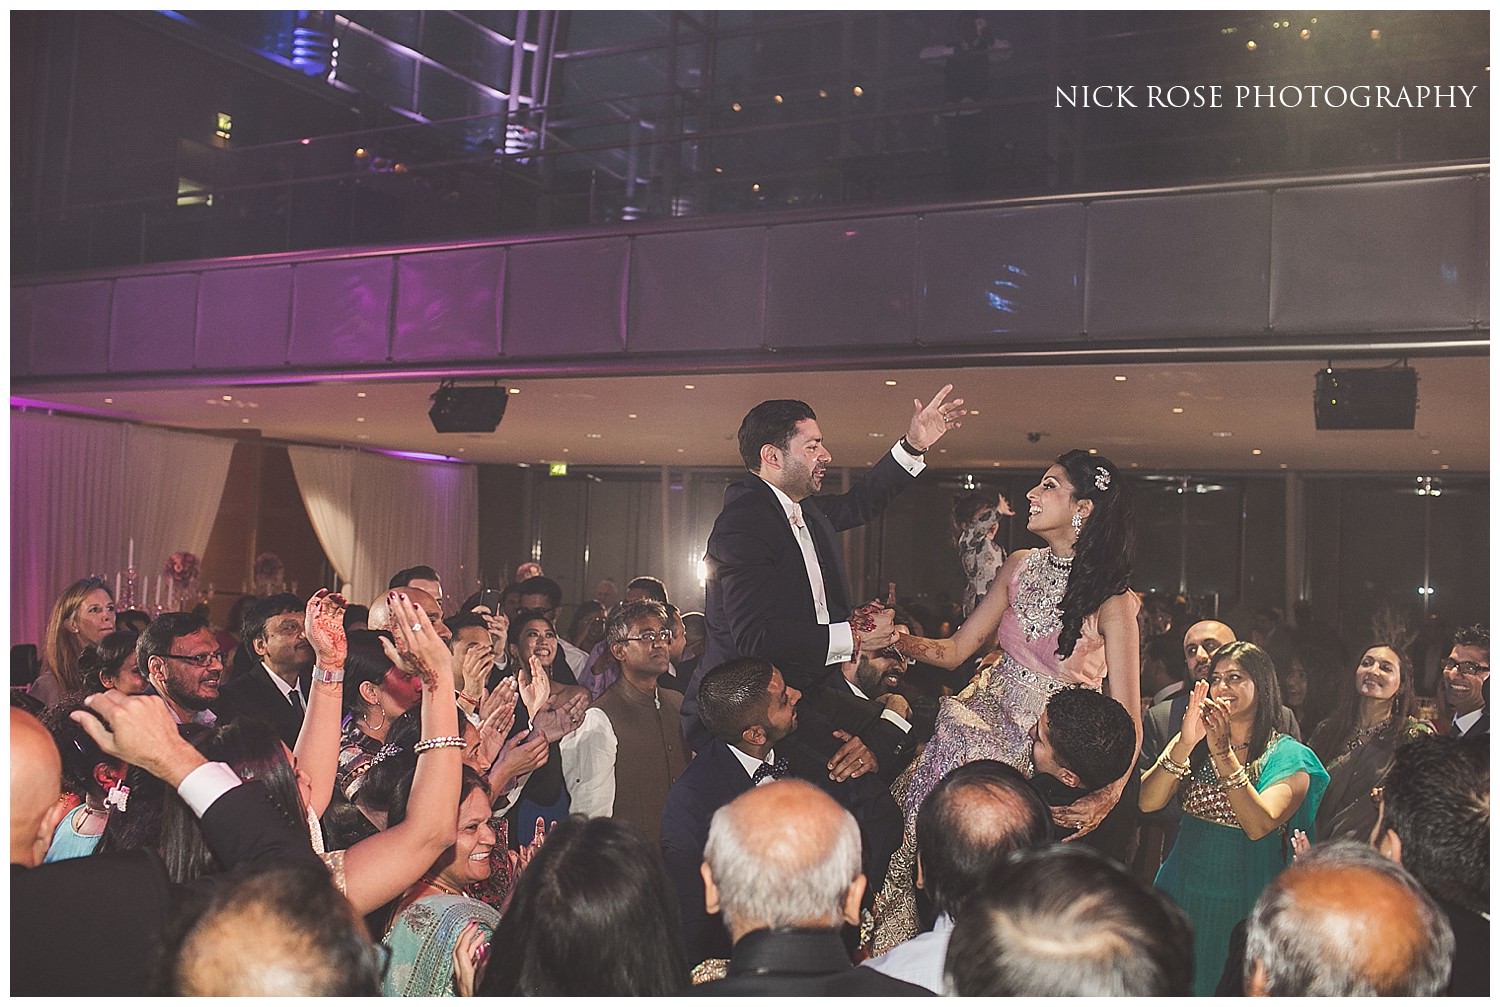  Bride and groom raised onto guests shoulders during an Indian wedding reception in East Wintergarden Canary Wharf London 